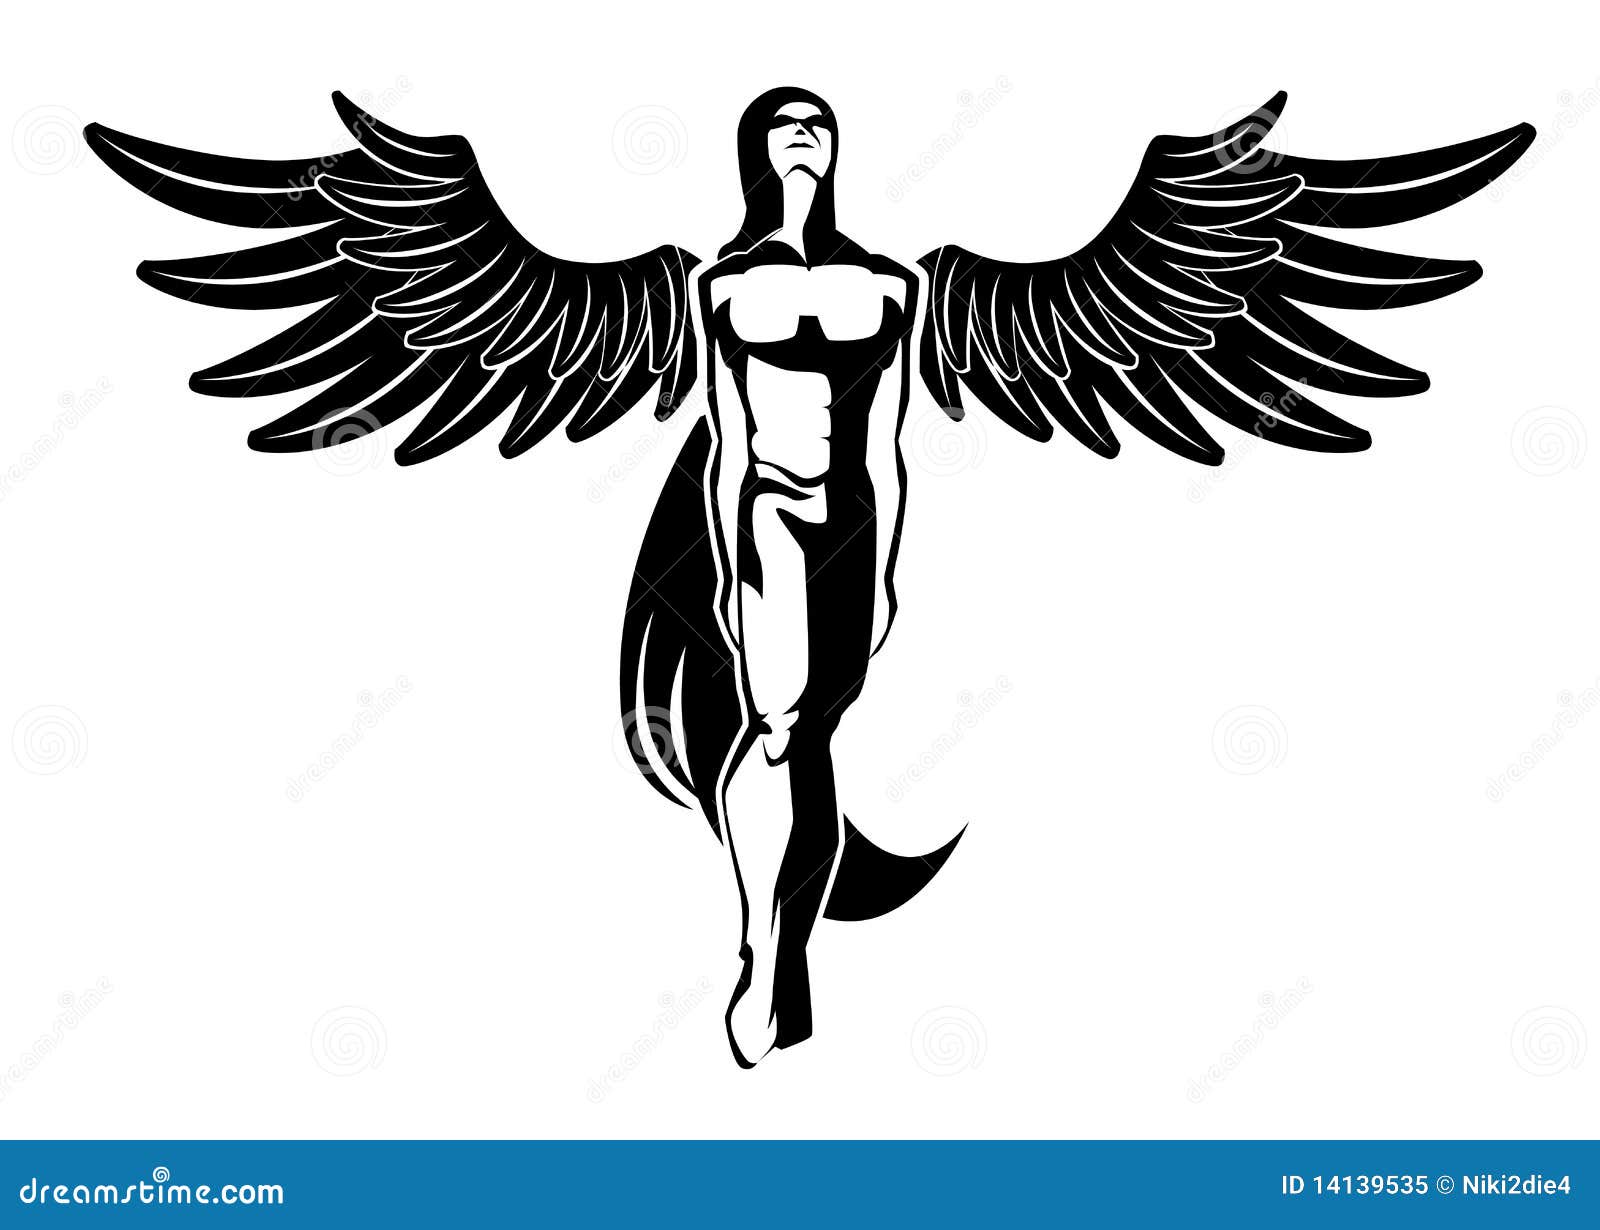 30 Angel Of Death Tattoo Pictures Illustrations RoyaltyFree Vector  Graphics  Clip Art  iStock